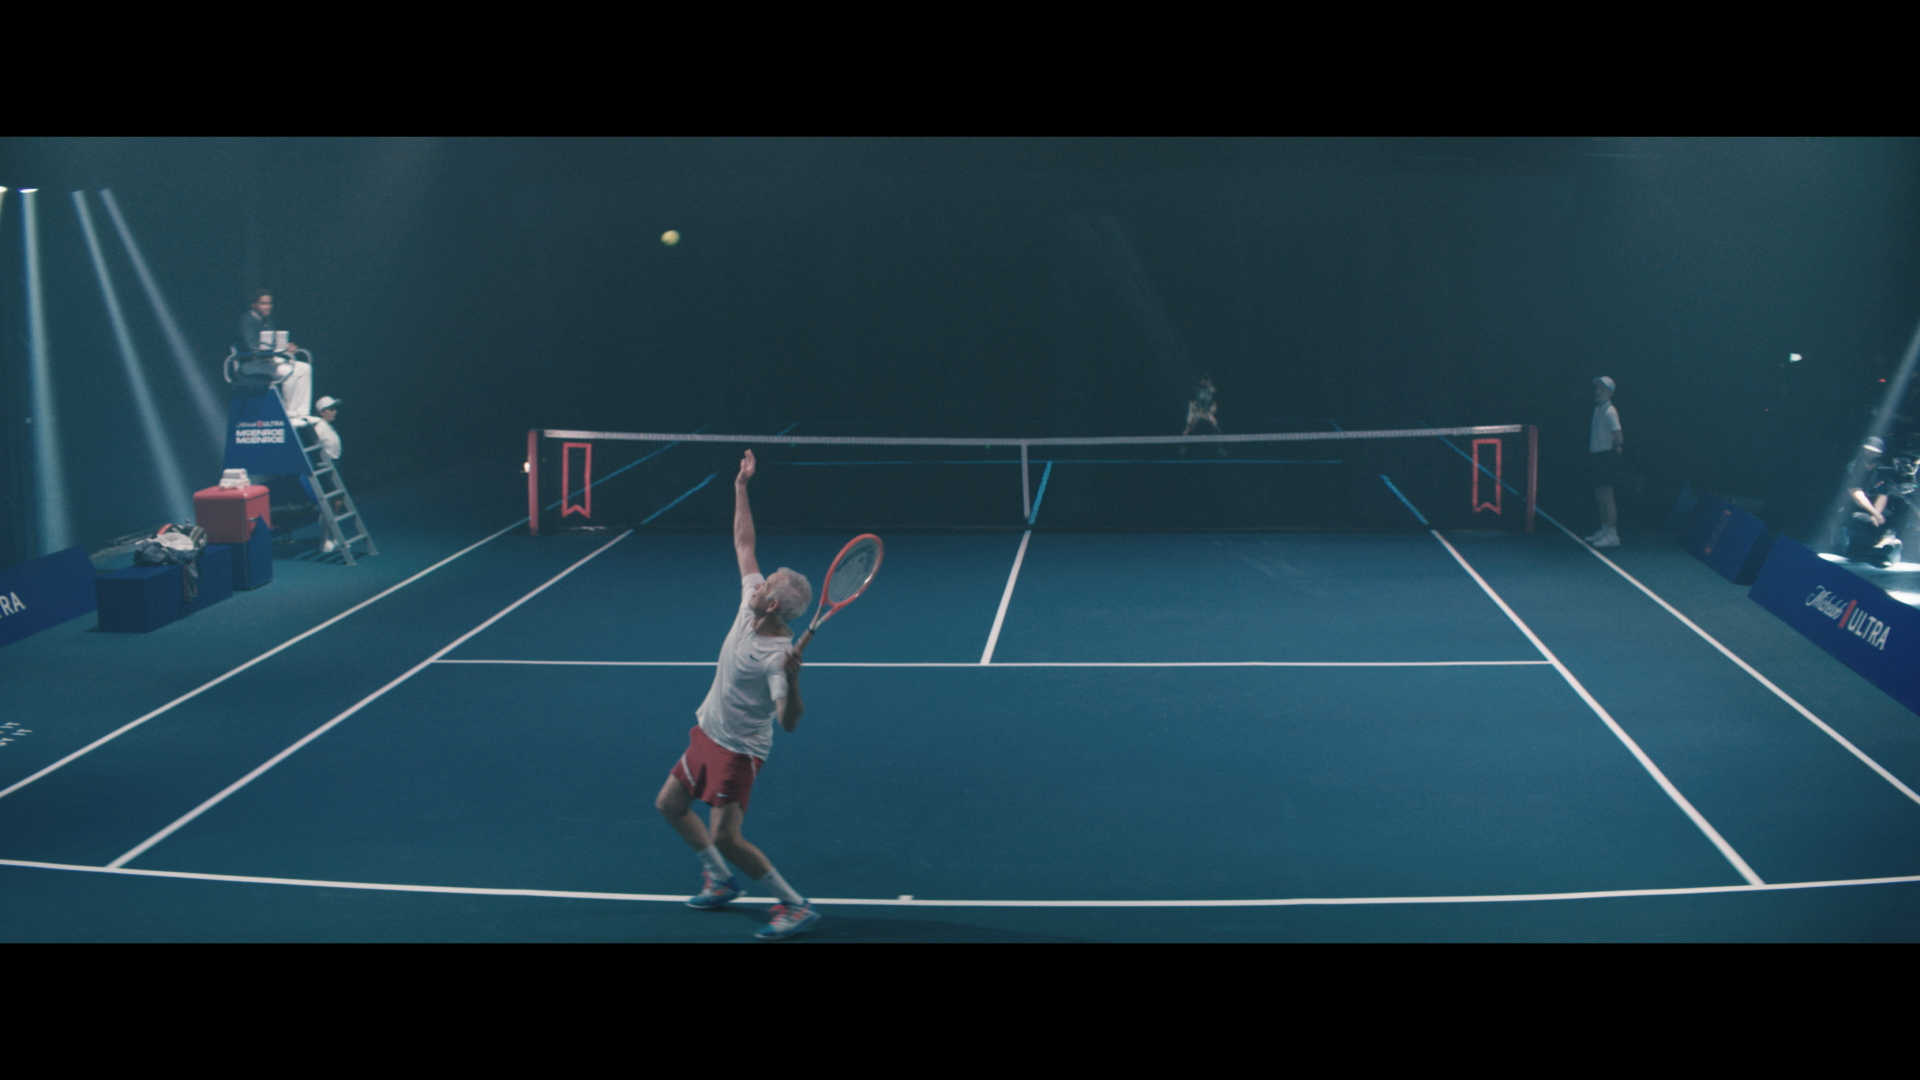 ESPN+ debuts ‘McEnroe vs. McEnroe’ the first-ever tennis match between a real person and their virtual avatar